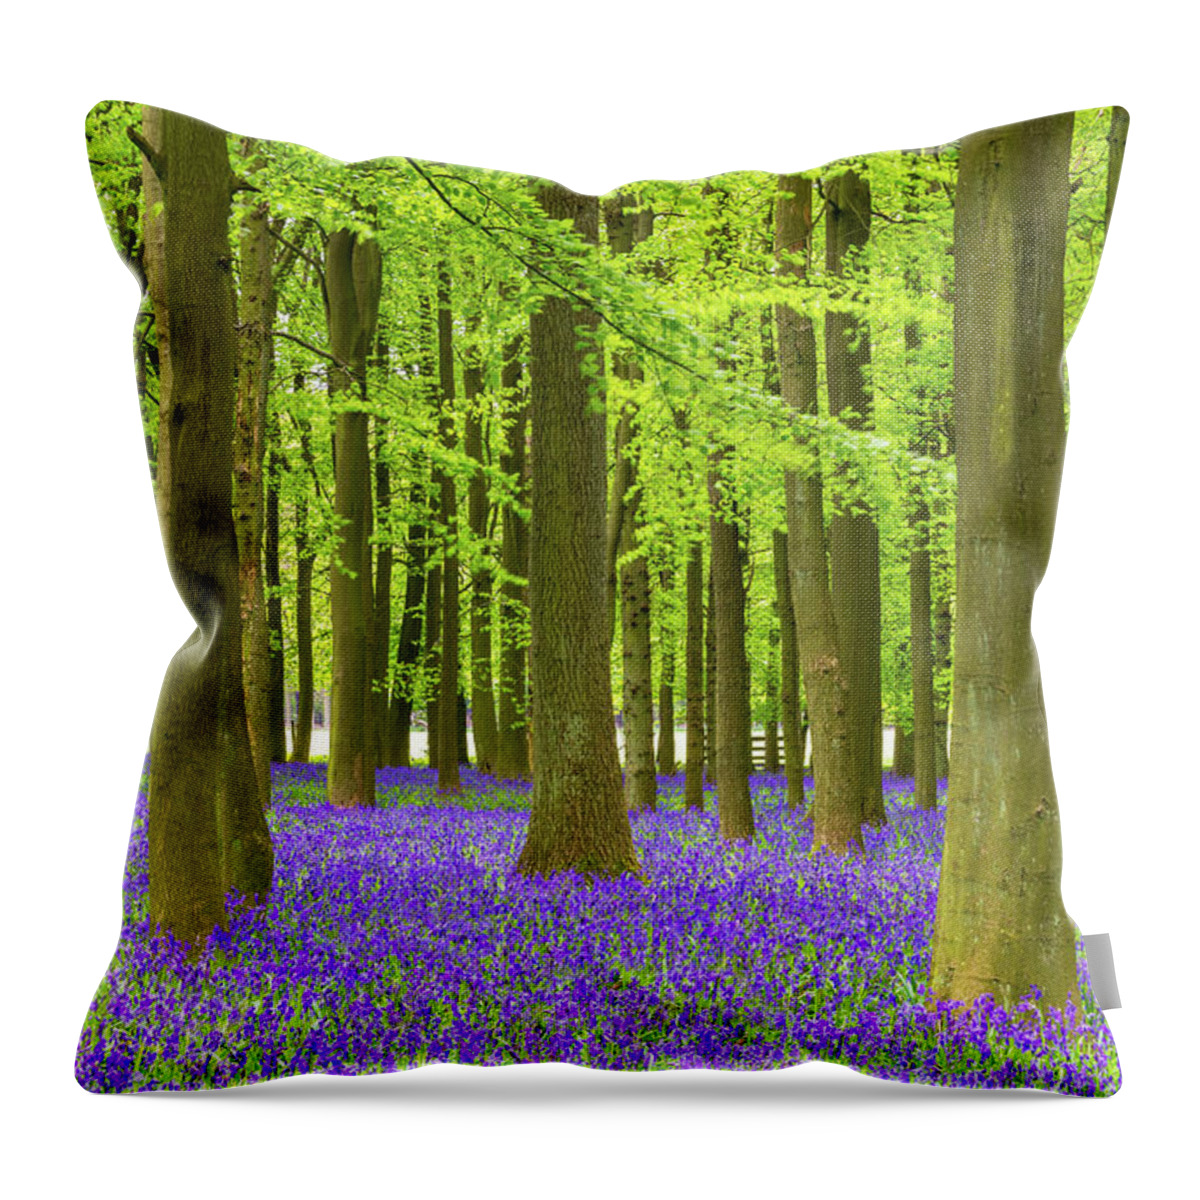 Scenics Throw Pillow featuring the photograph Bluebell And Beech Tree Forest by Chrishepburn